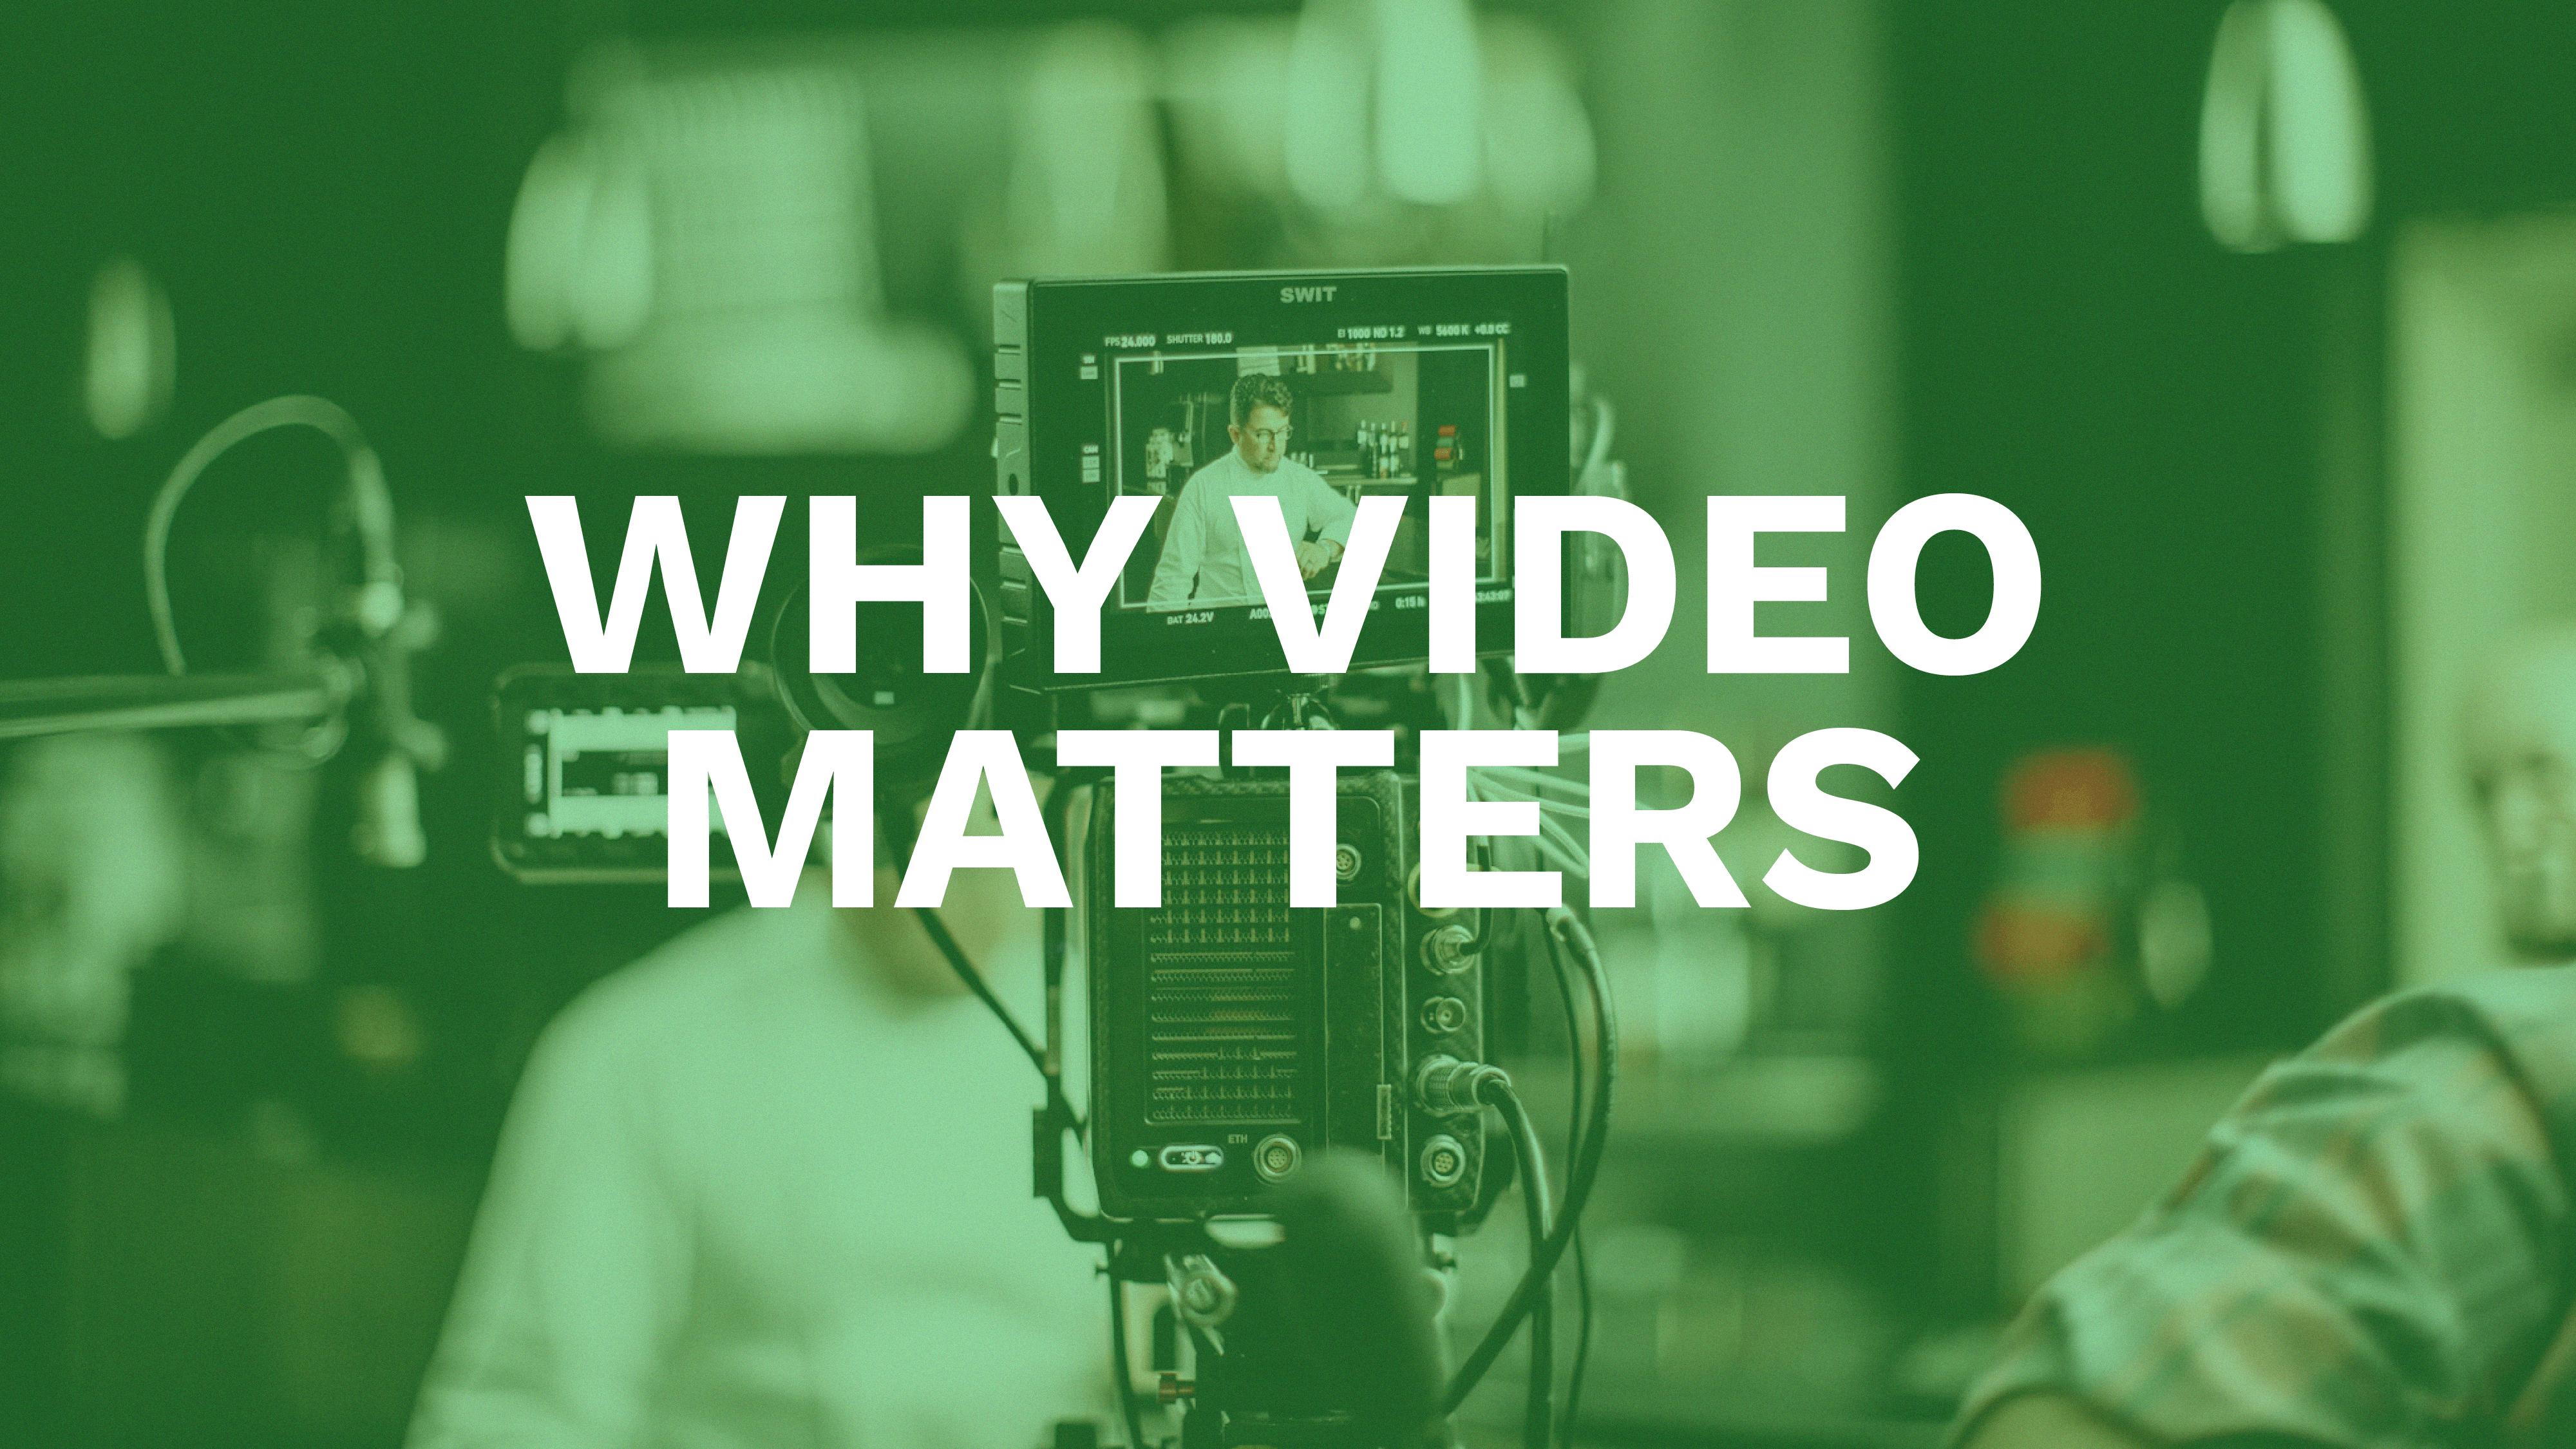 Image of video camera focused on a chef, the title "Why Video Matters" is overlayed on the image.